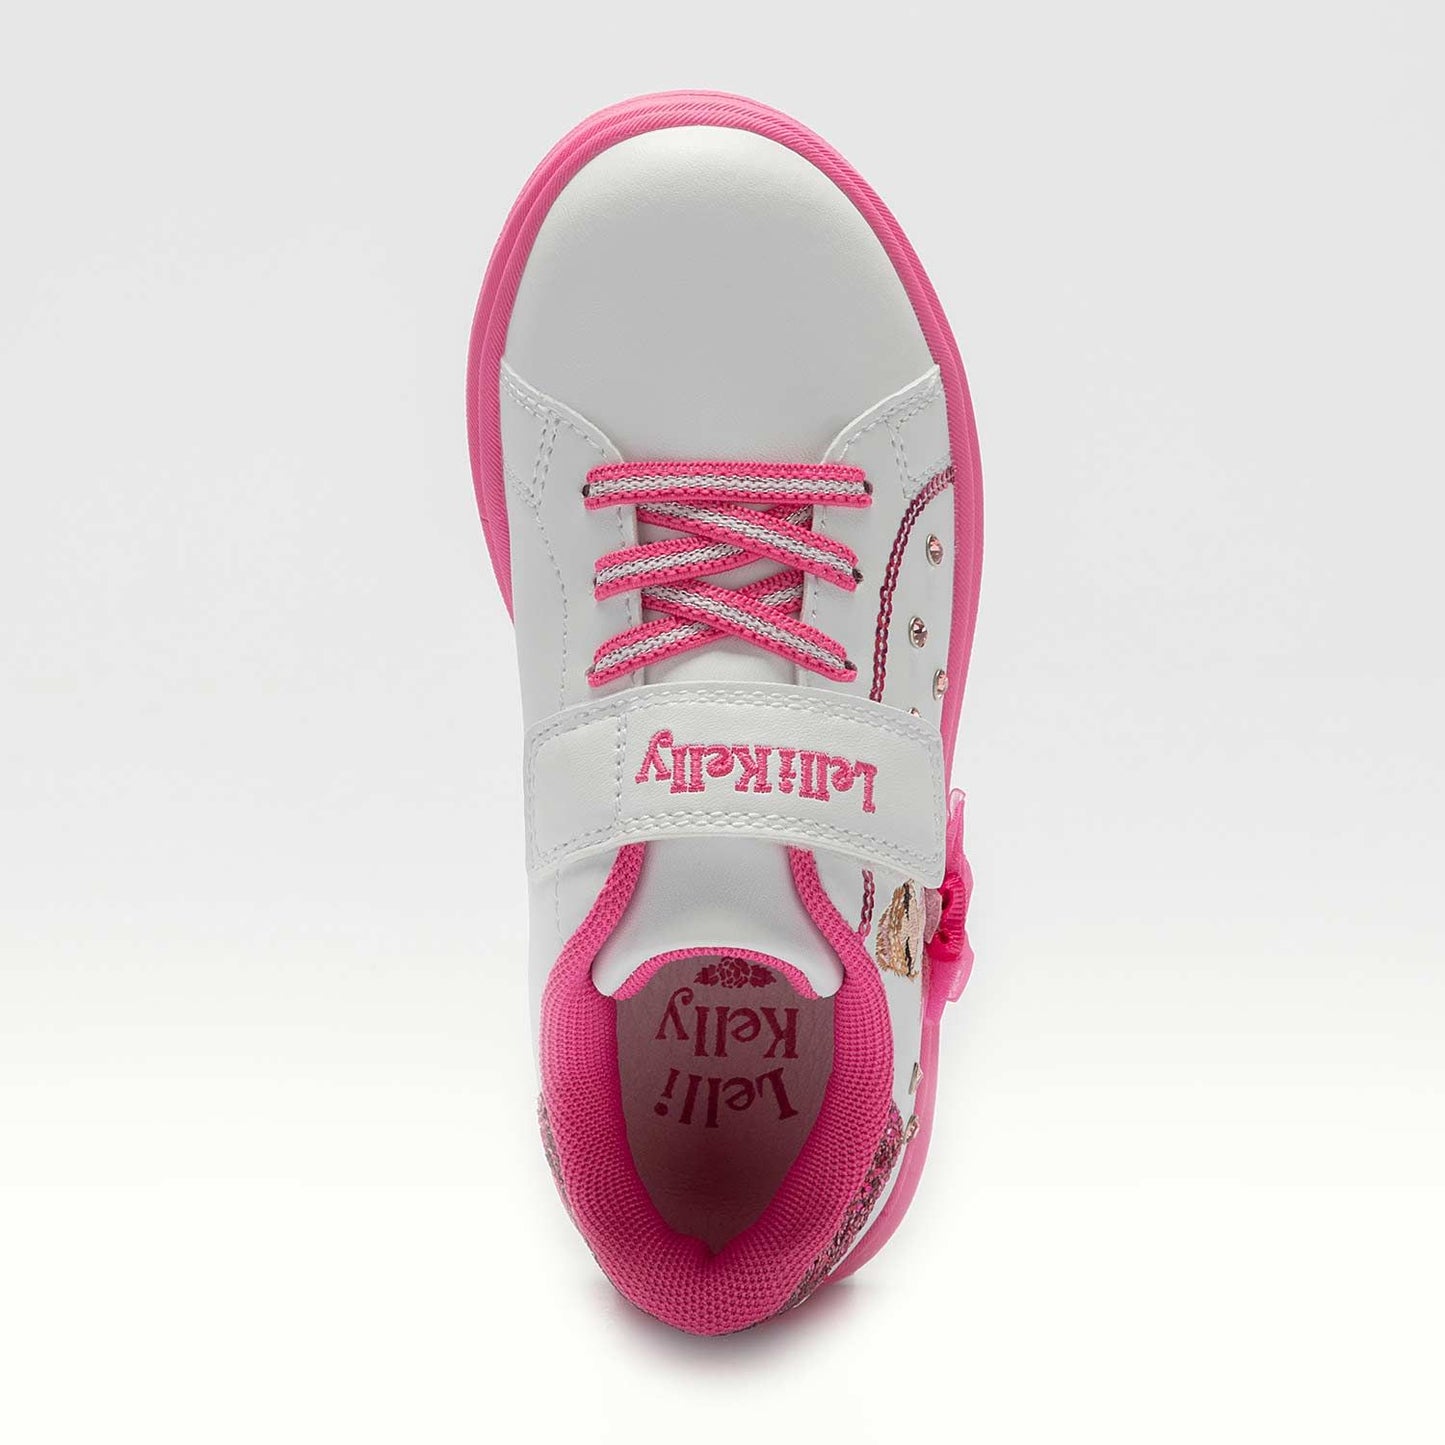 A girls casual trainer by Lelli Kelly, style Mille Stelle, in white and pink with velcro fastening. Above view.